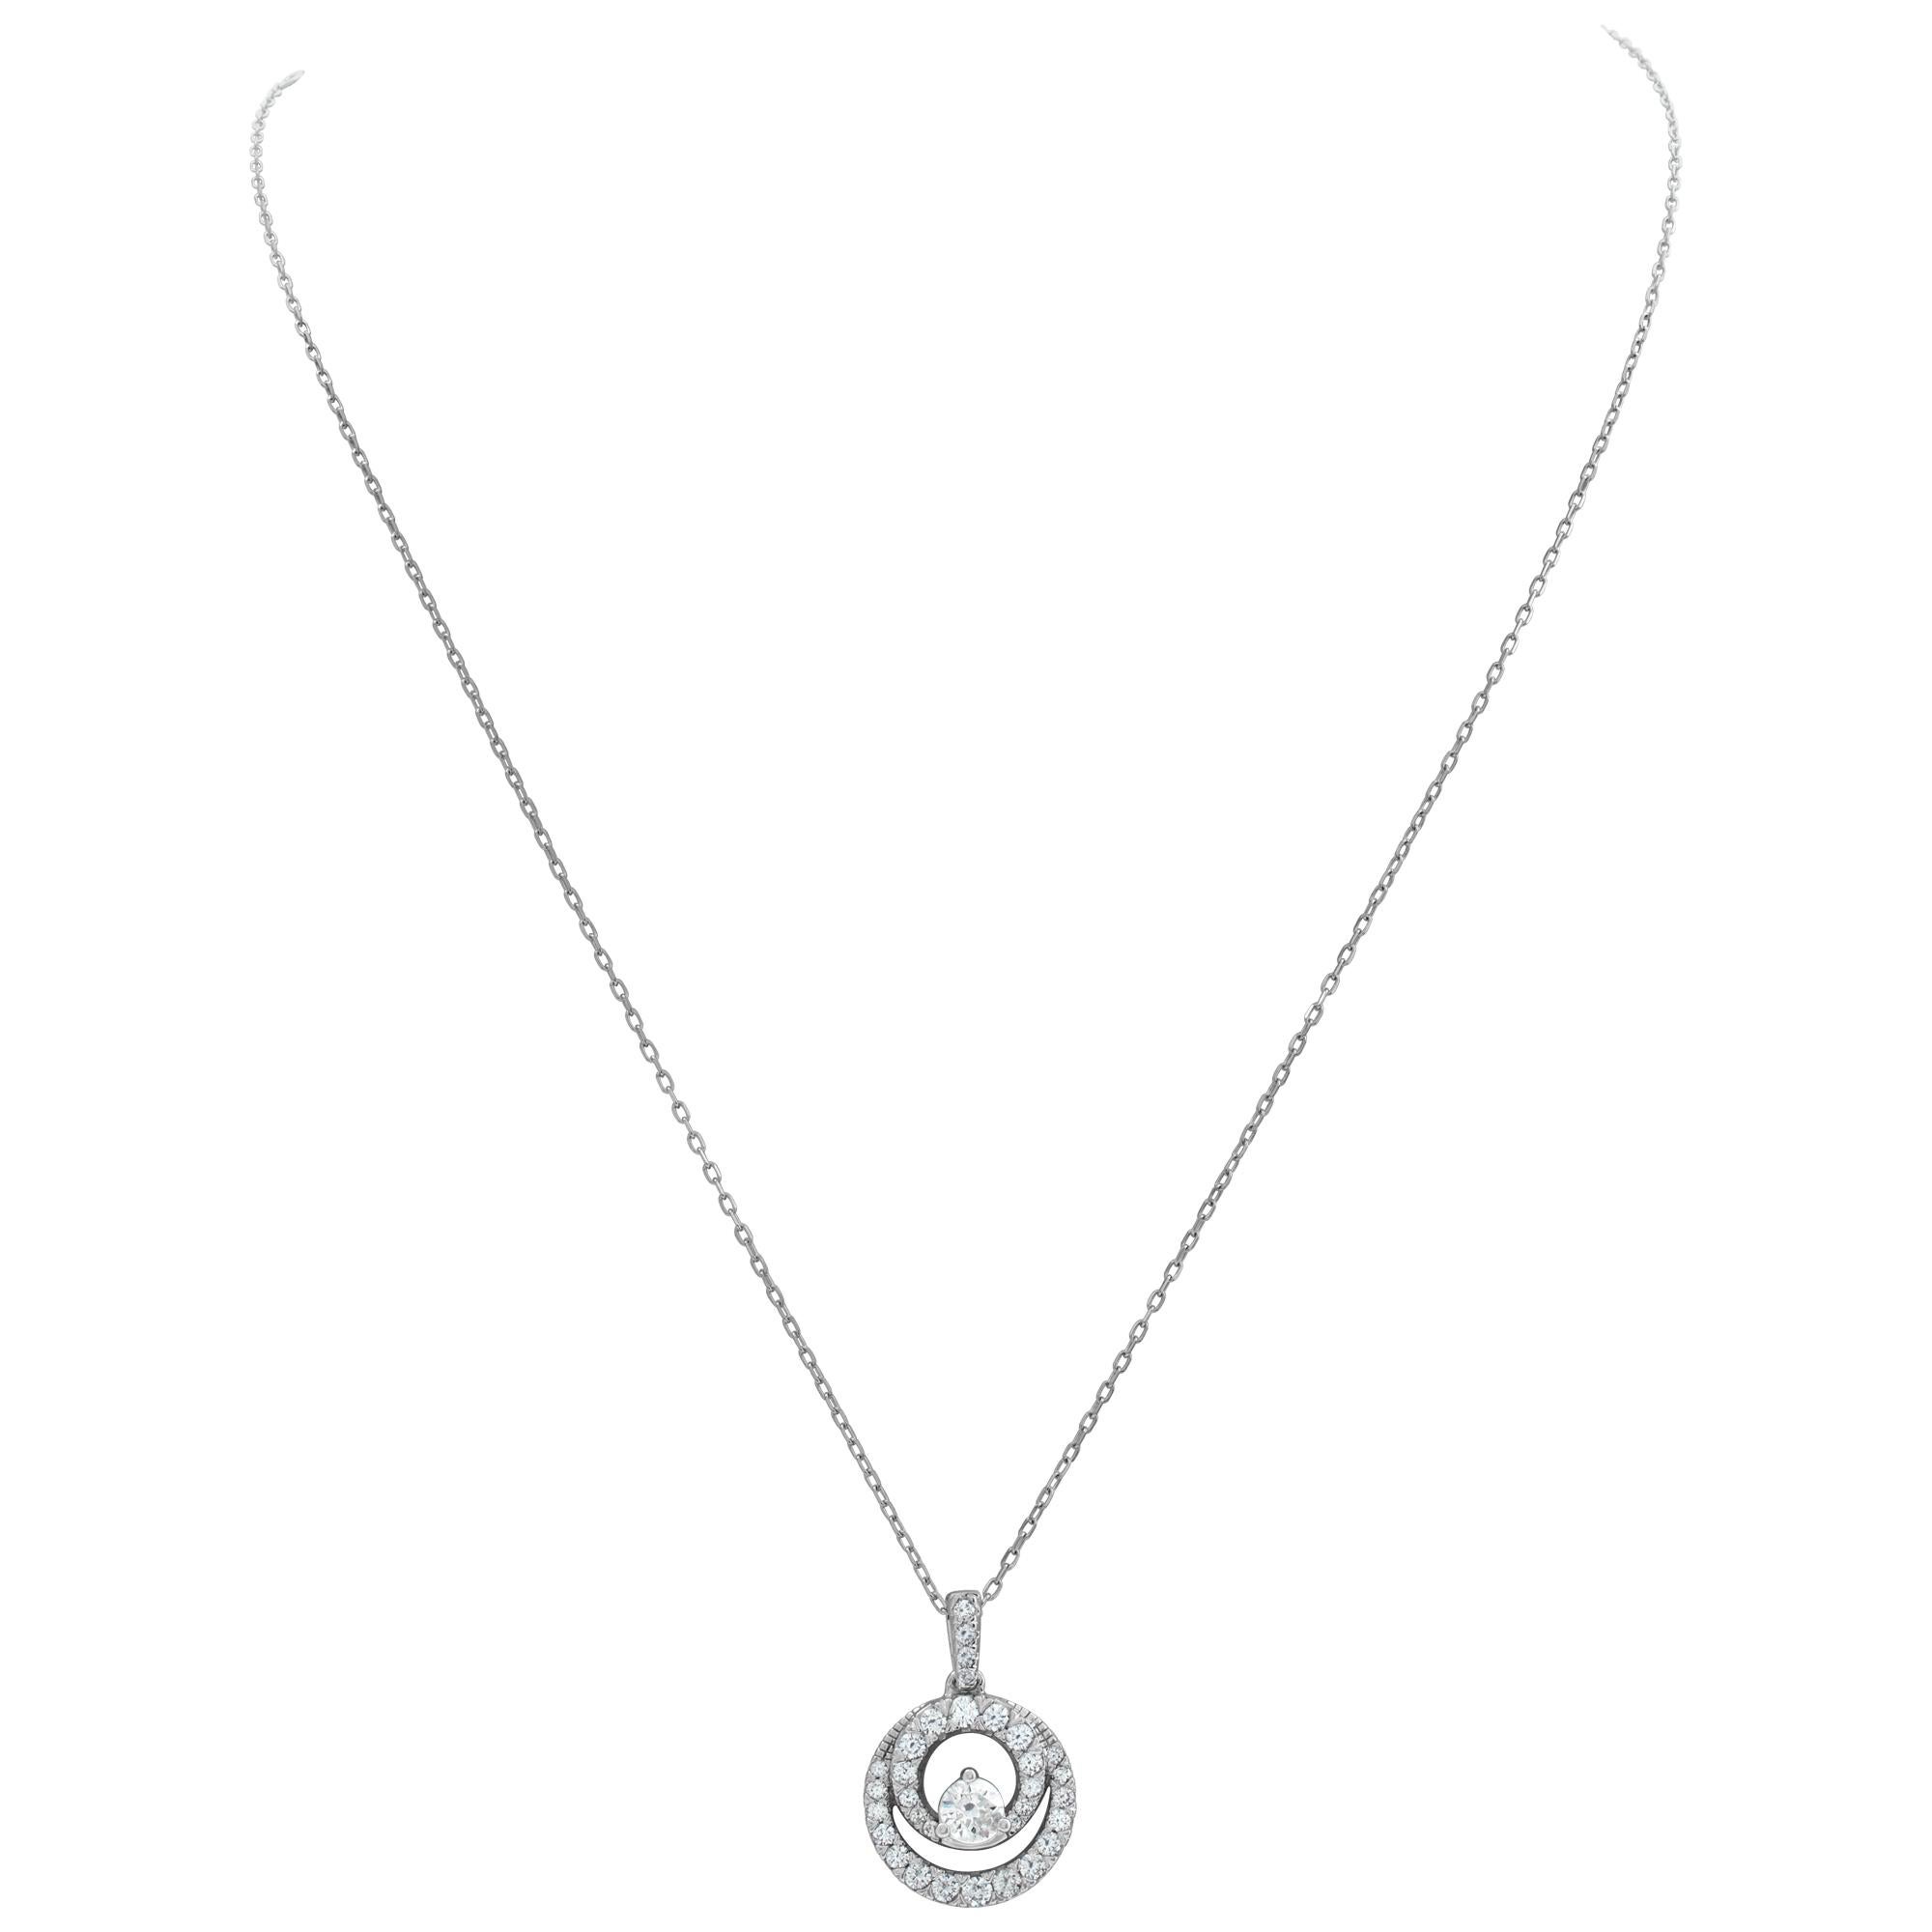 Circle Diamond pendant in 14k white gold with approximately 0.50 carat in G-H color, VS-SI clarity round diamonds. Pendant length 0.92 inches and pendant width 0.60 inches. Chain length 18 inches, pendant 15mm x 22.5mm.